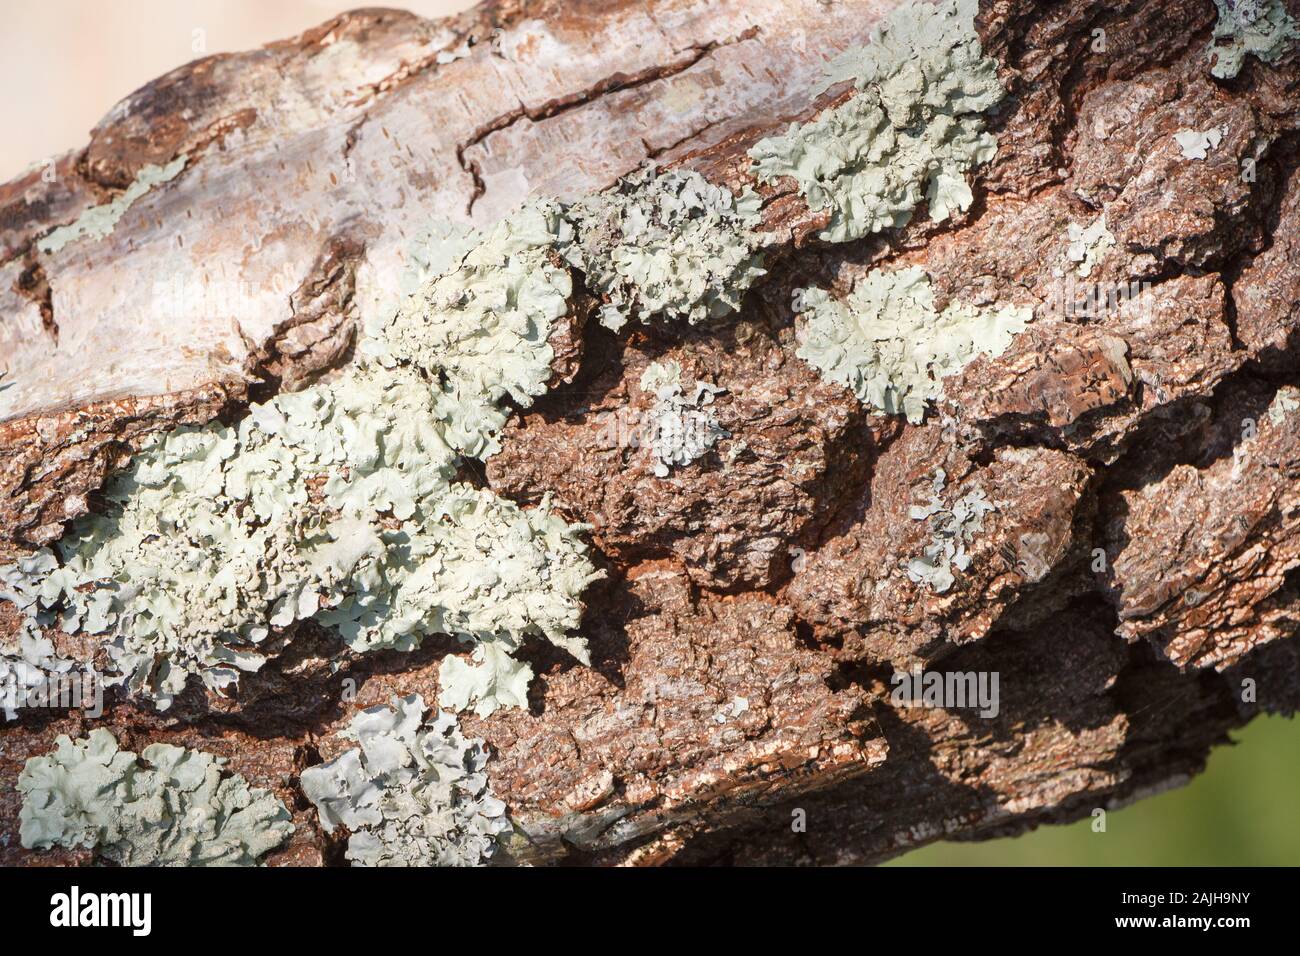 Close-up on bark of a tree with lichen in a garden Stock Photo